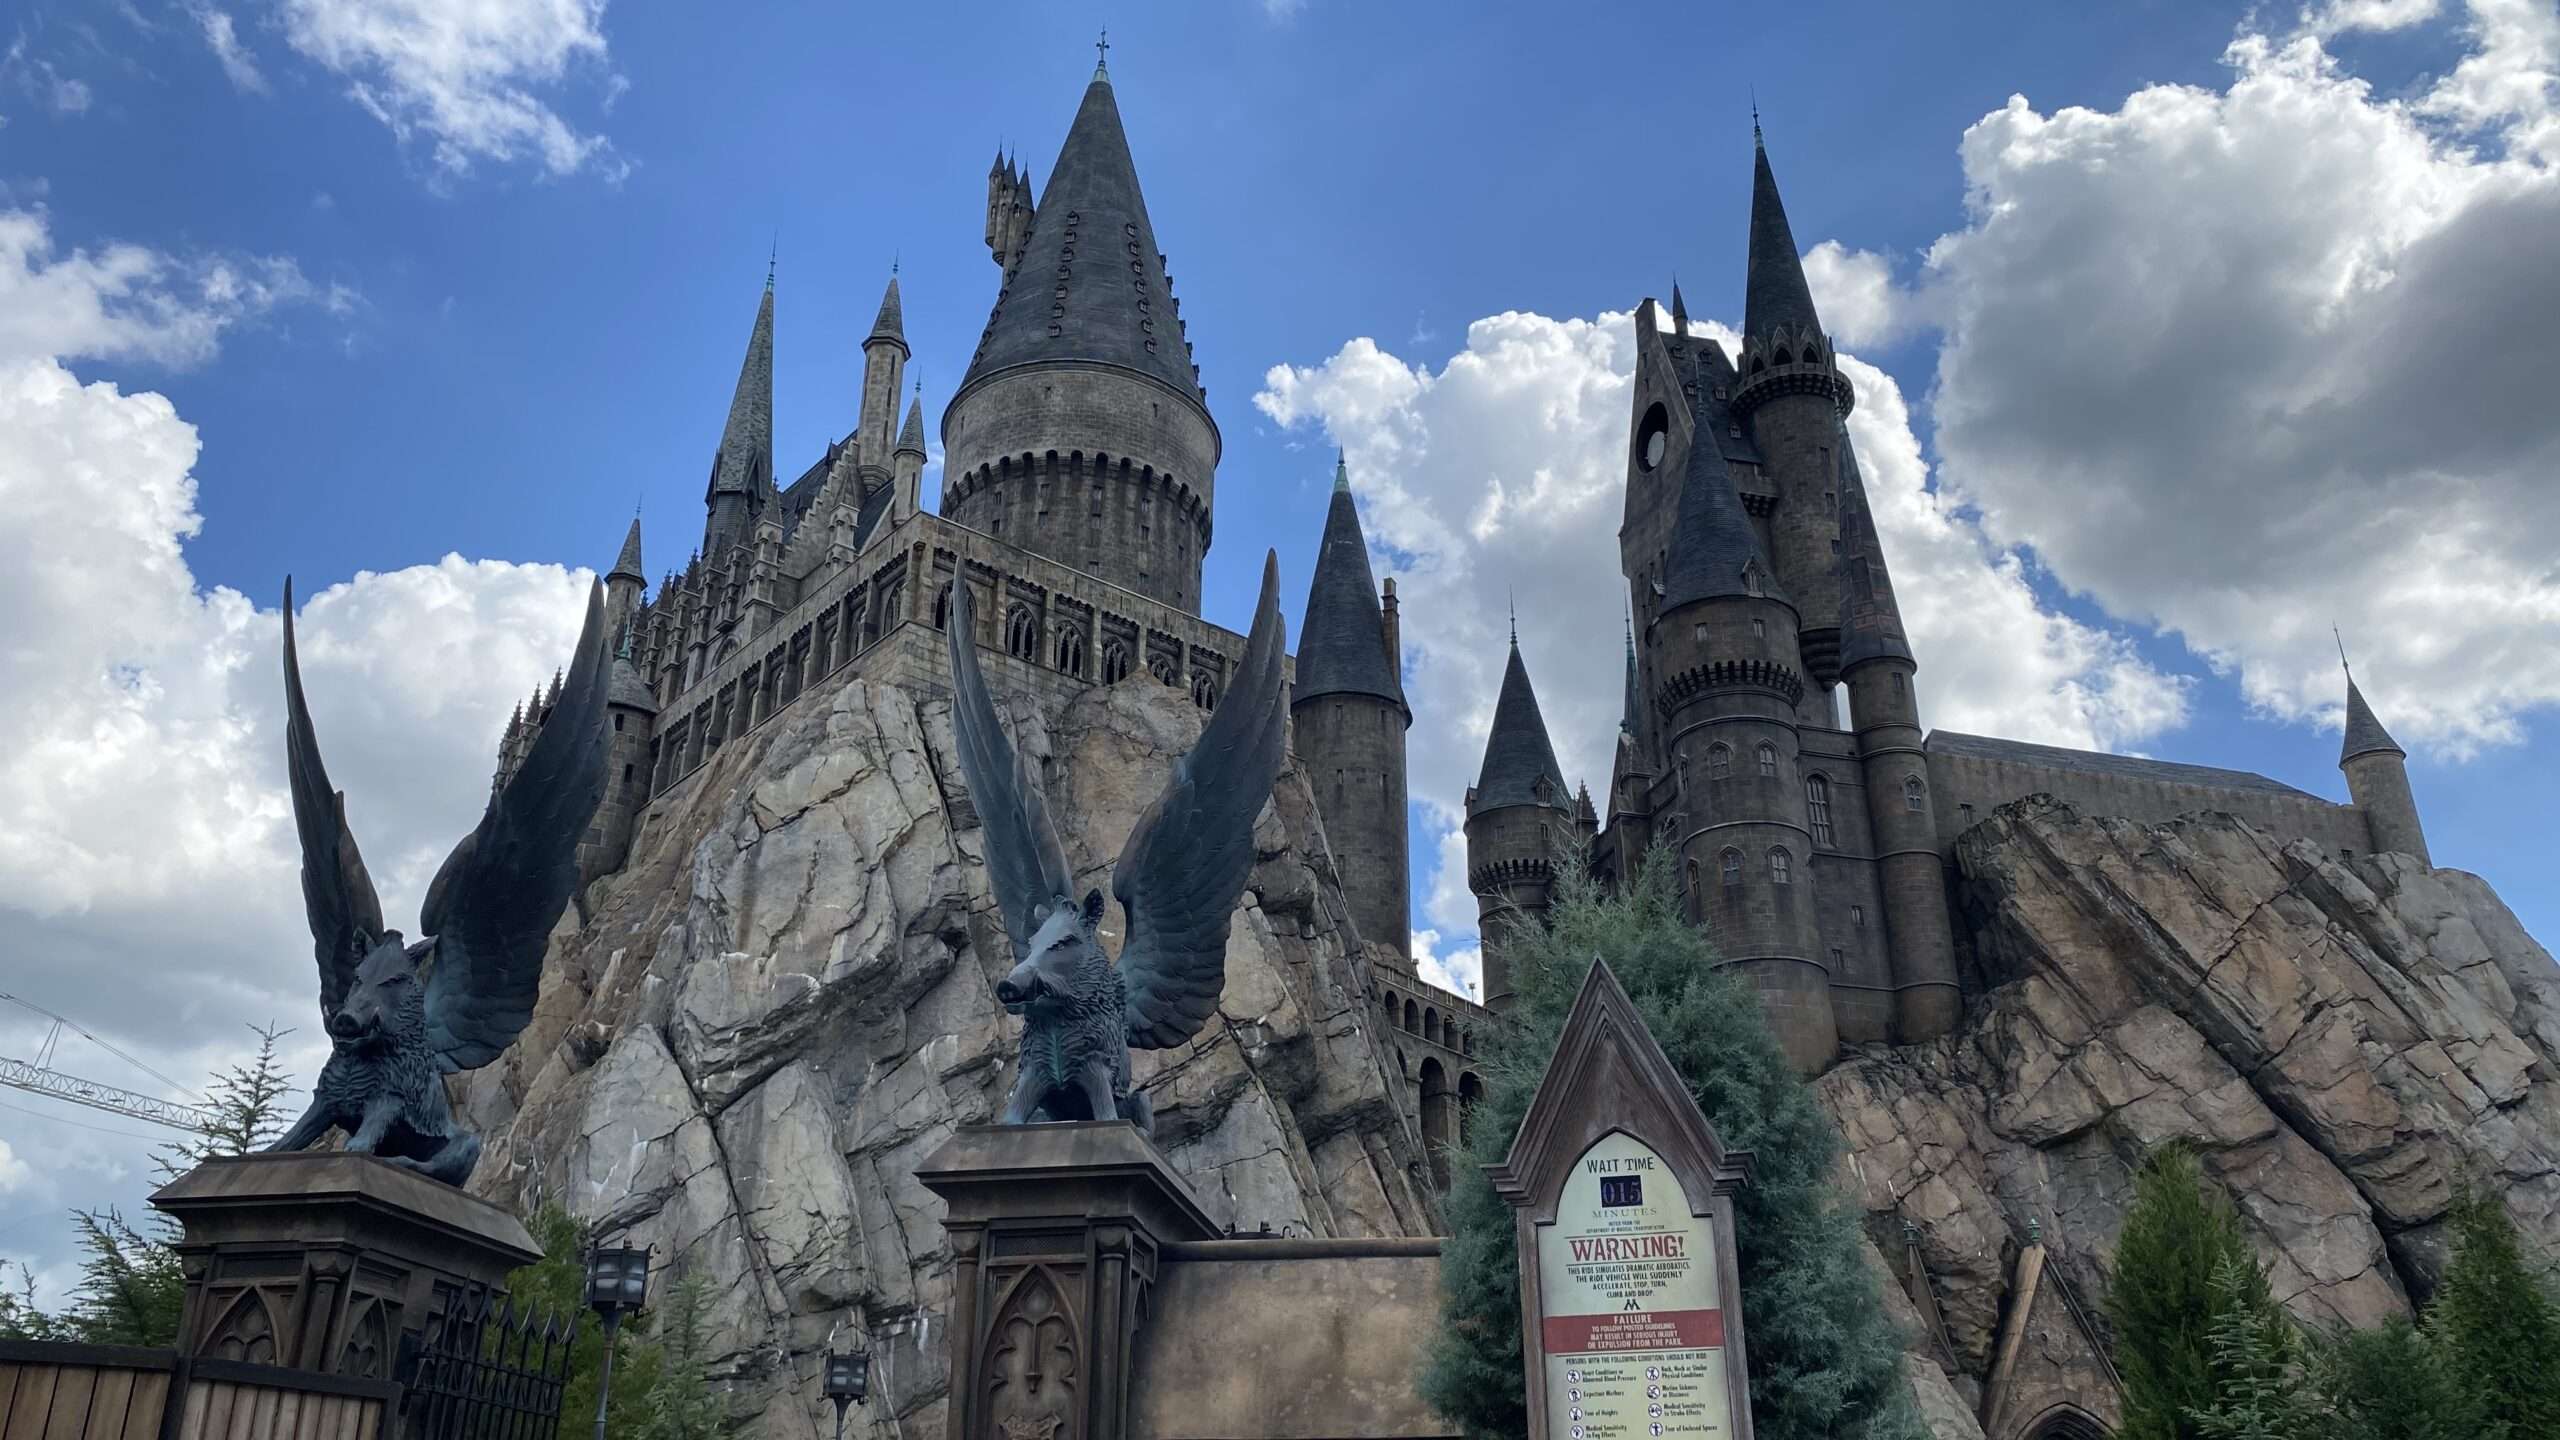 The Magical Rides at The Wizarding World of Harry Potter